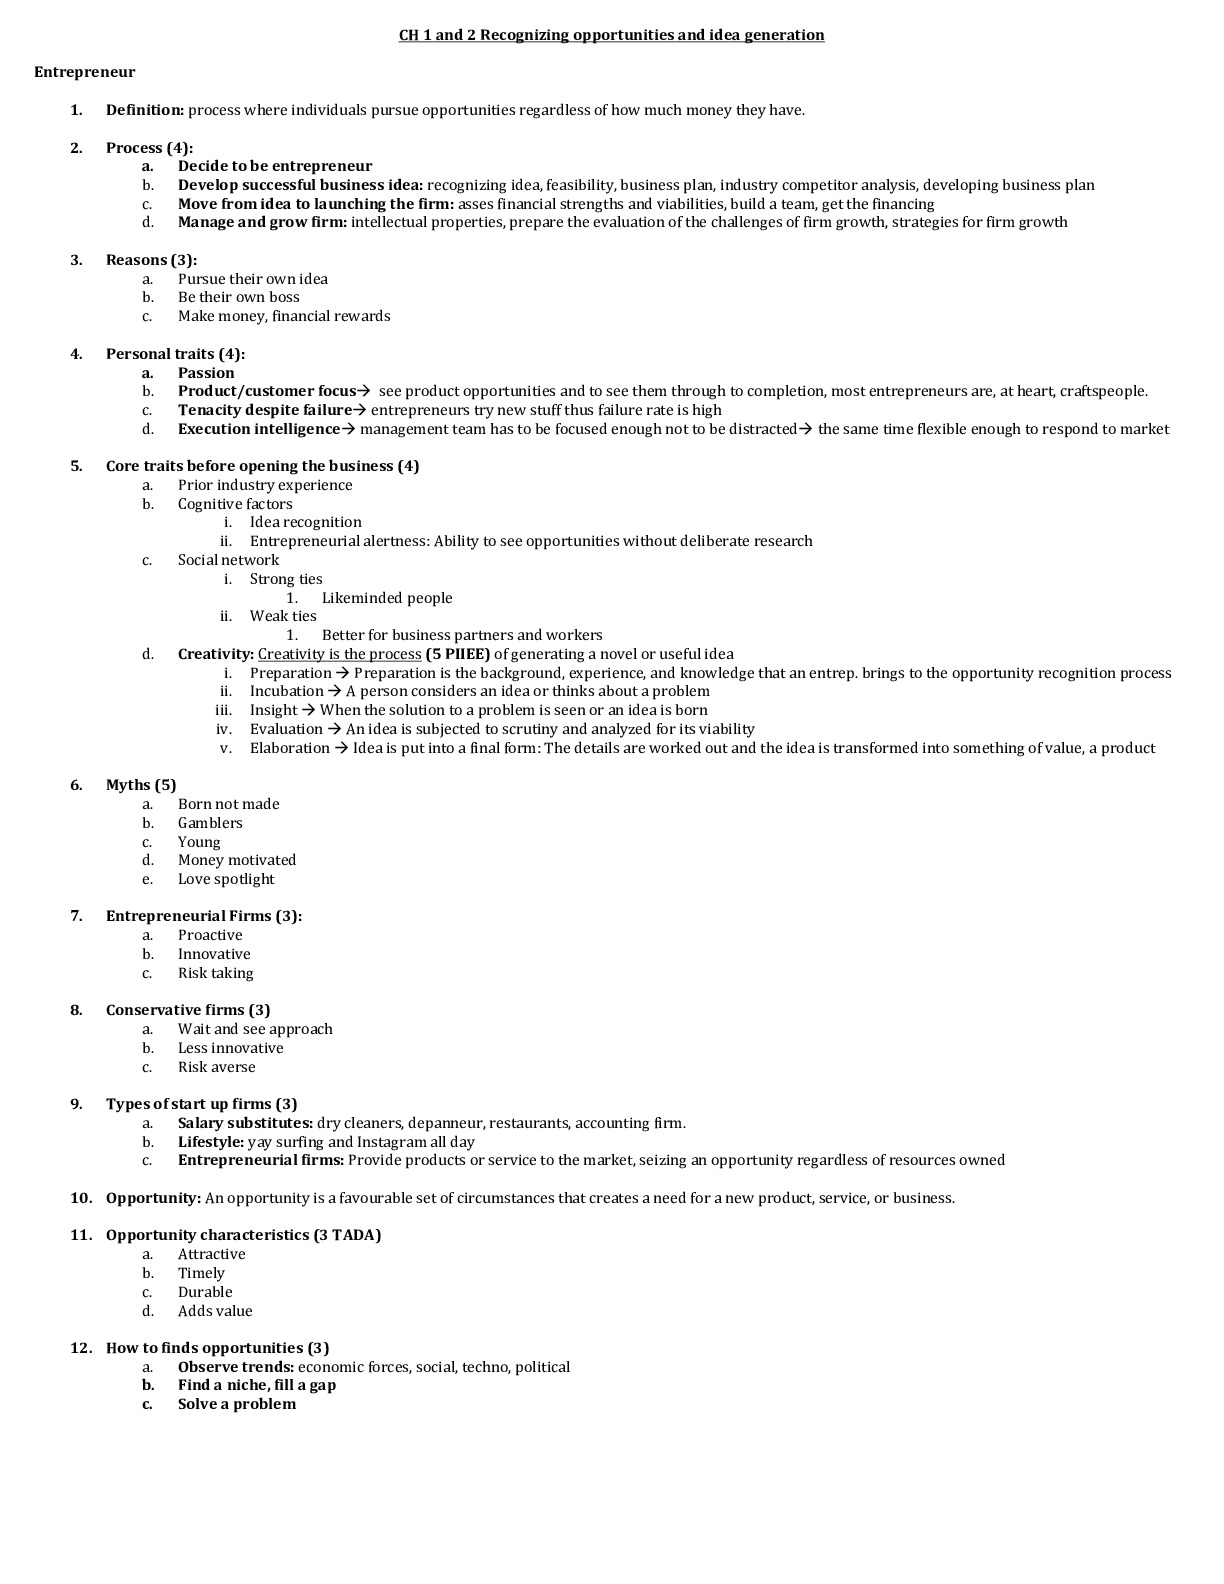 COMM_320_Review_notes_FINAL_v2.0